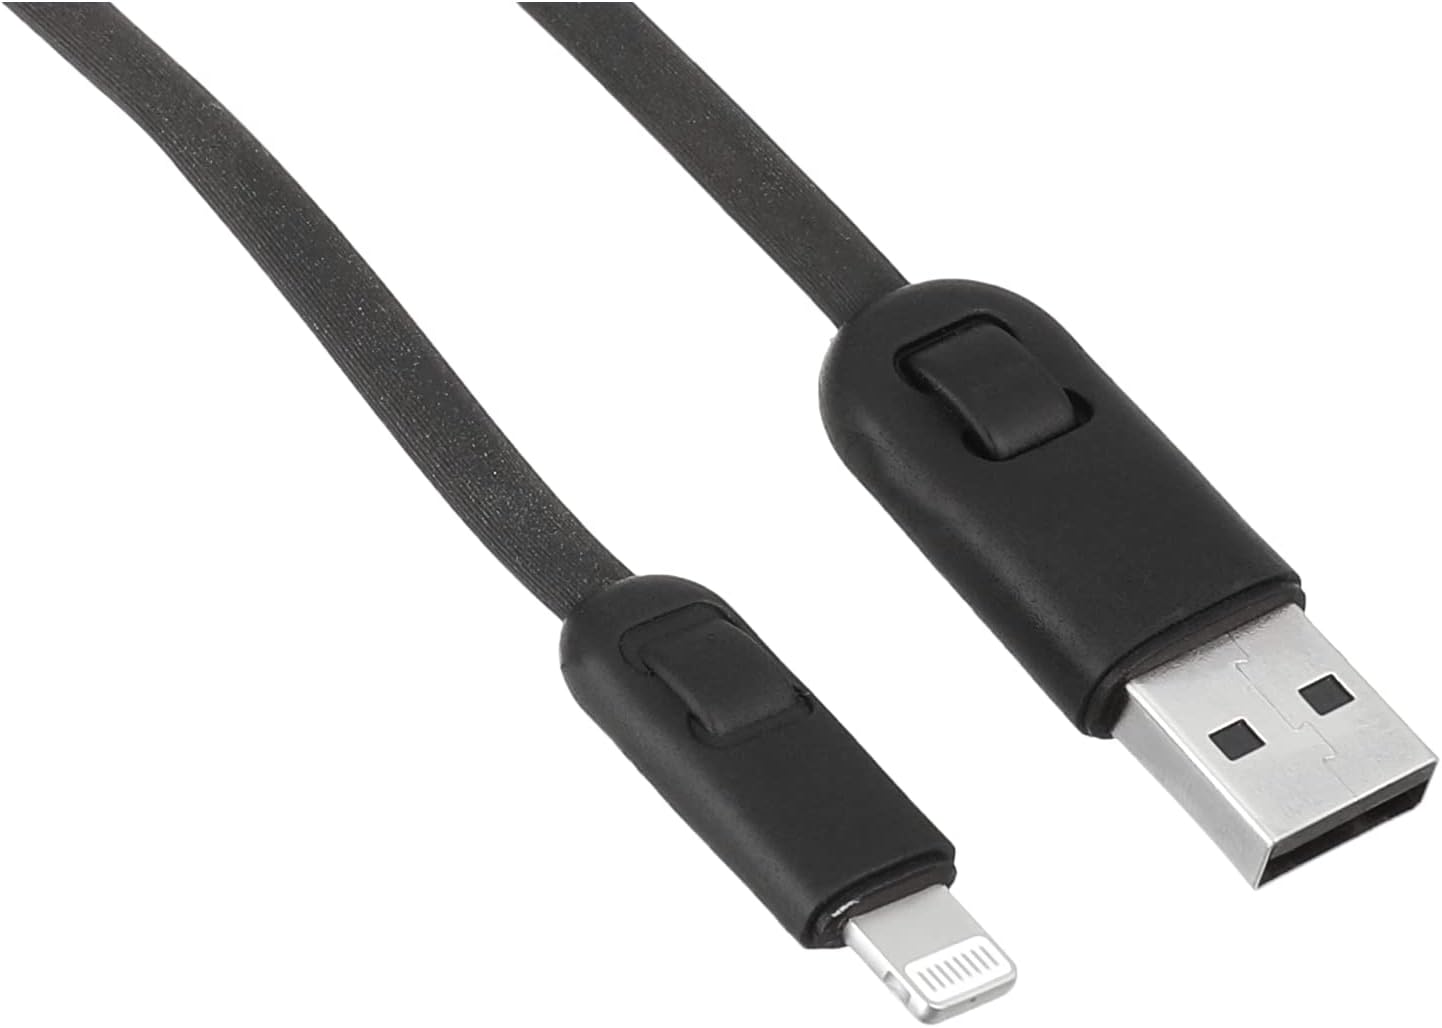 Joyroom USB-A to Lightning Charging and Data Cable, 1 Meter, Black - S-1030M1